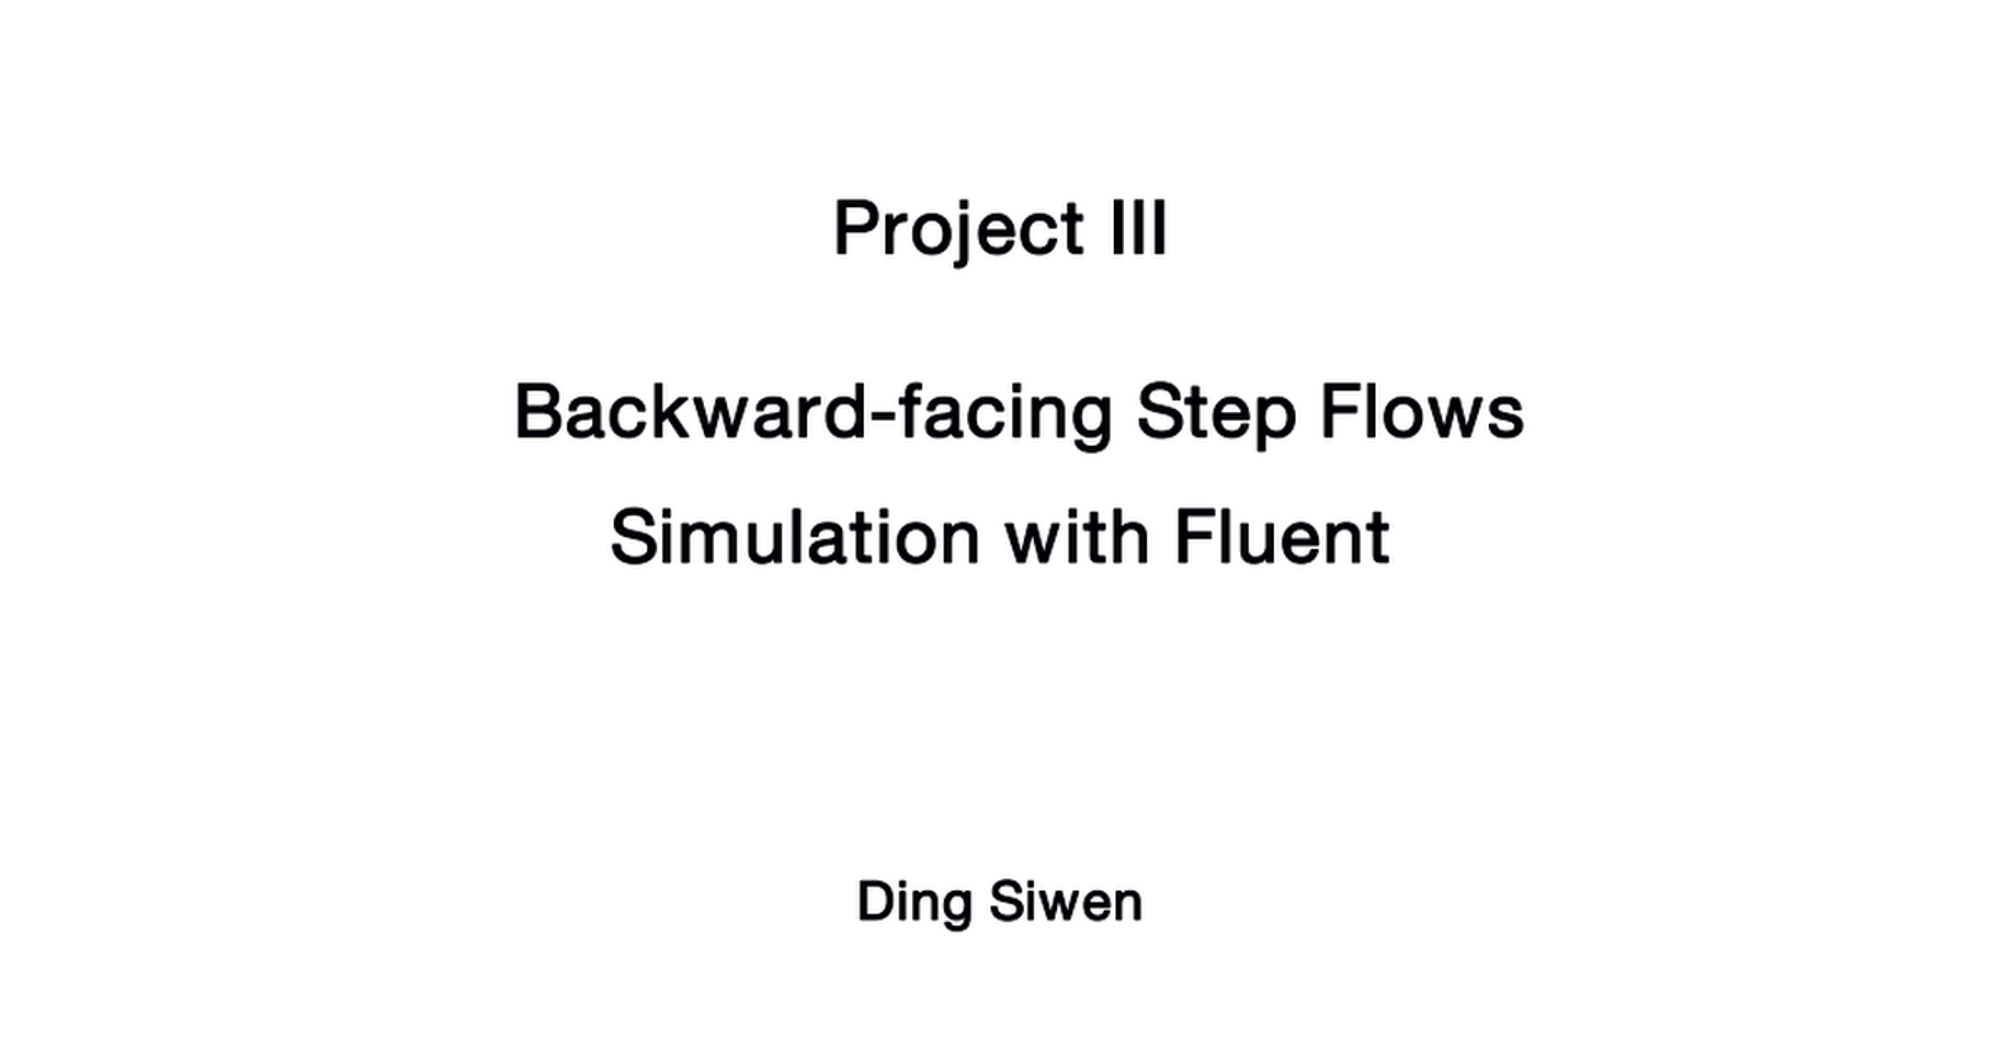 Project III-Backward-facing Step Flows Simulation with Fluent.pdf